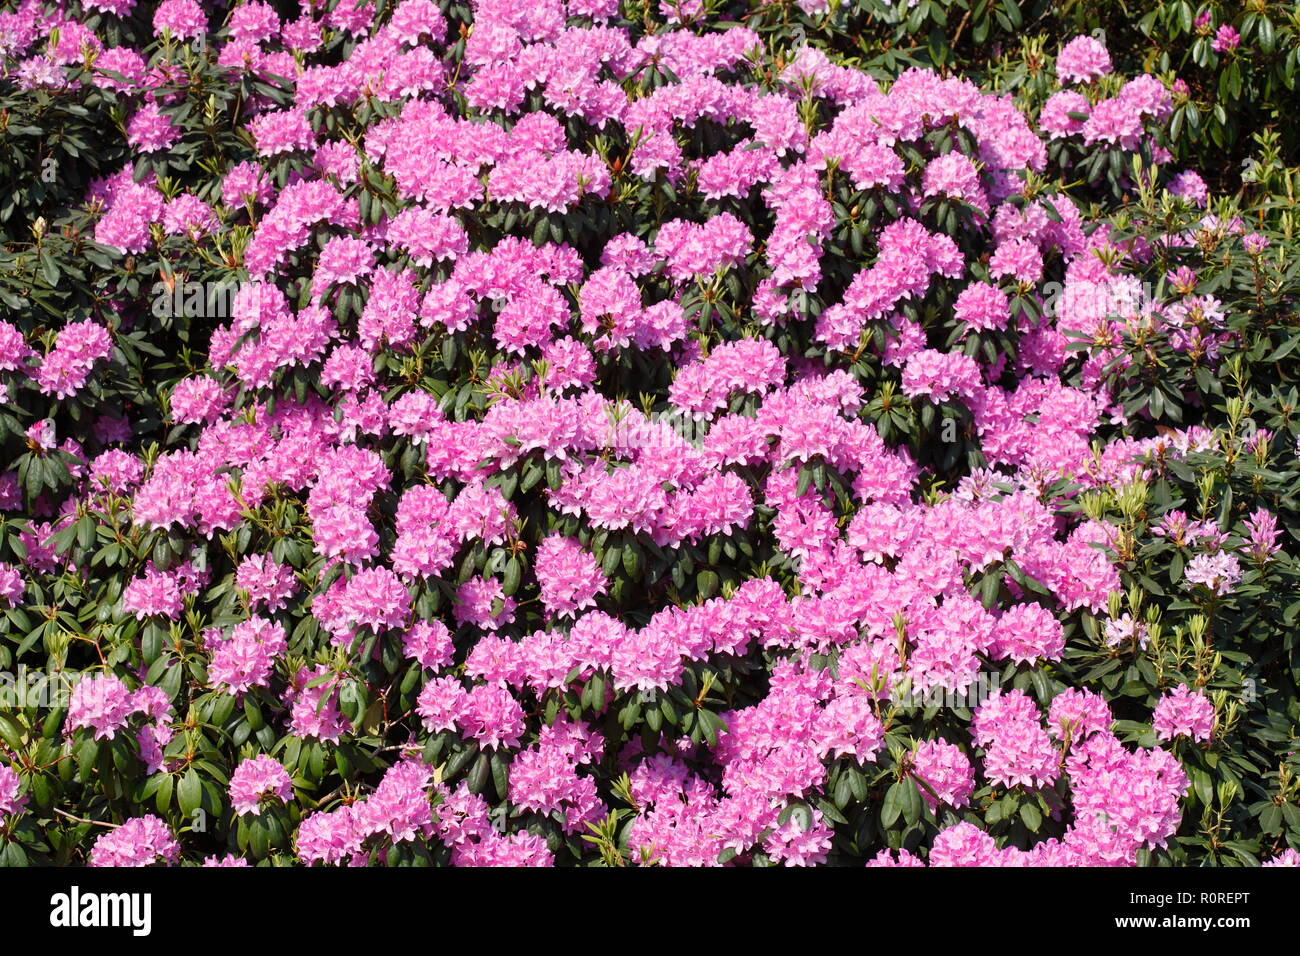 Pink Rhododendronflower (Rhododendron), Germany Stock Photo